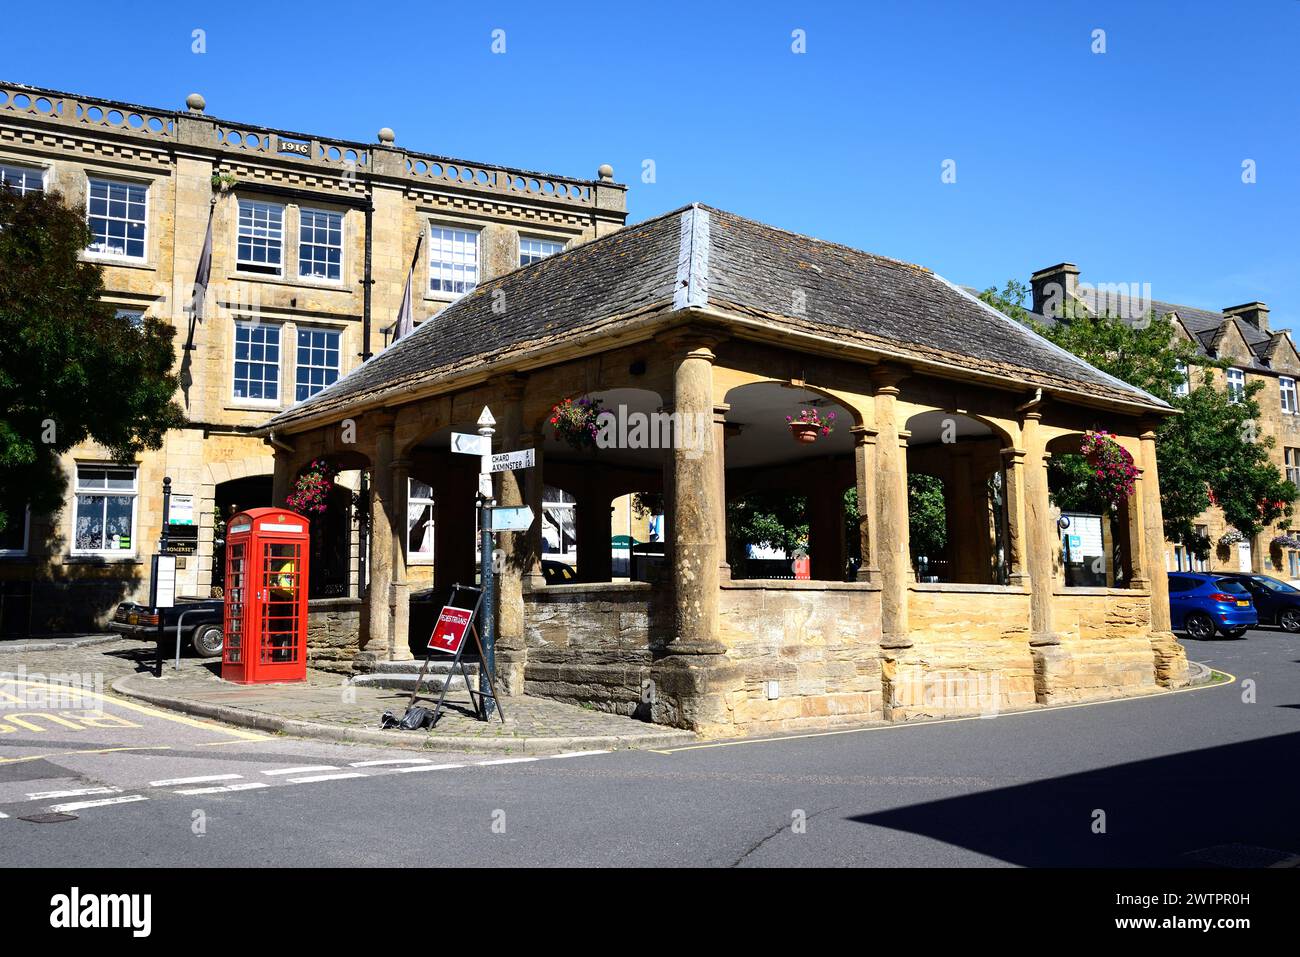 View of the Market House in Market Place along East Street in the town centre, Ilminster, Somerset, UK, Europe. Stock Photo